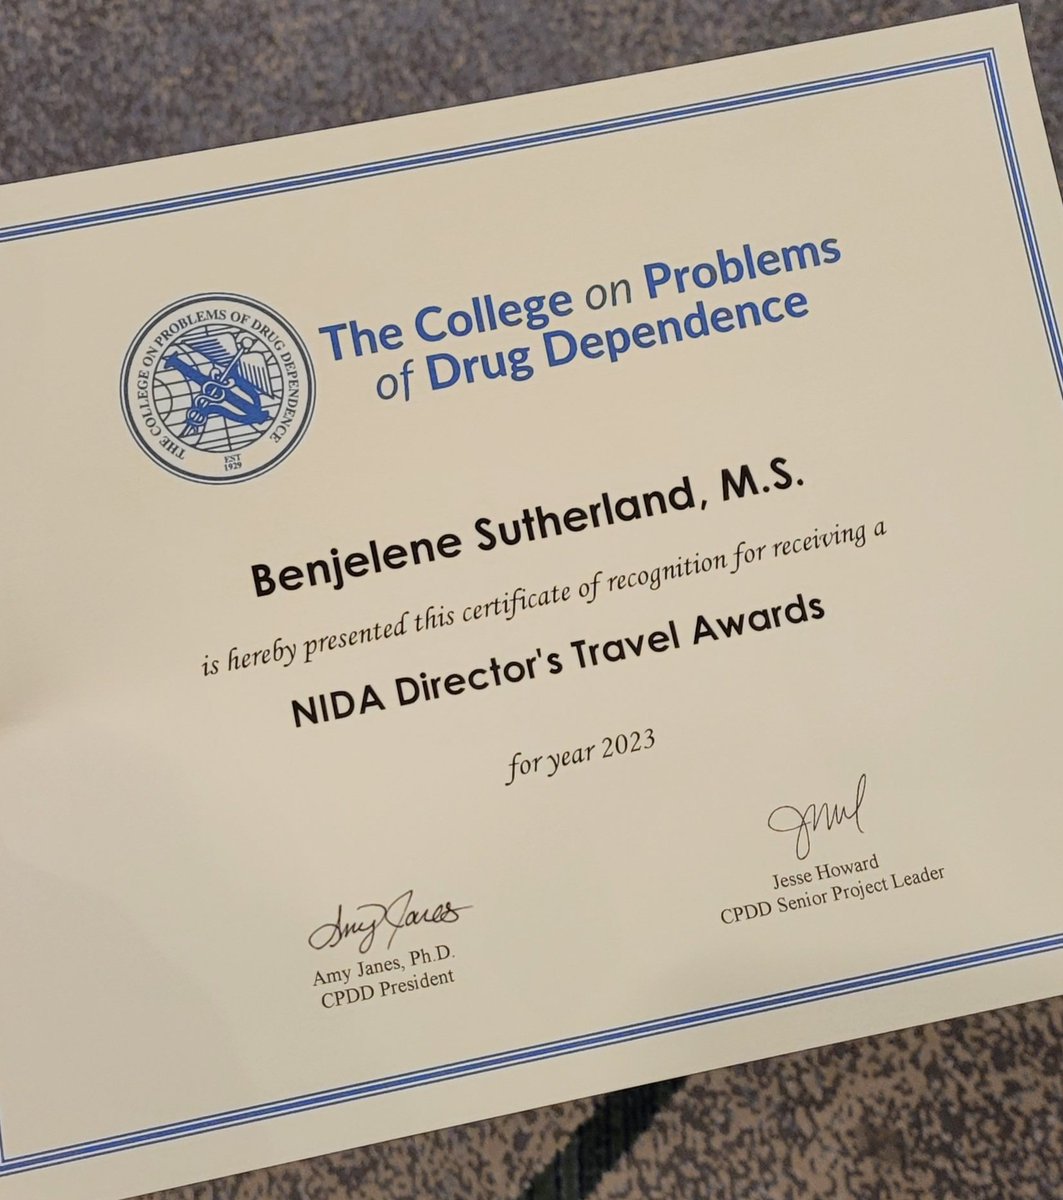 Thank you so much to @CPDDorg @NIDAnews for the #NIDA director's travel award. I feel deeply honored! #cpdd23 #cpdd2023